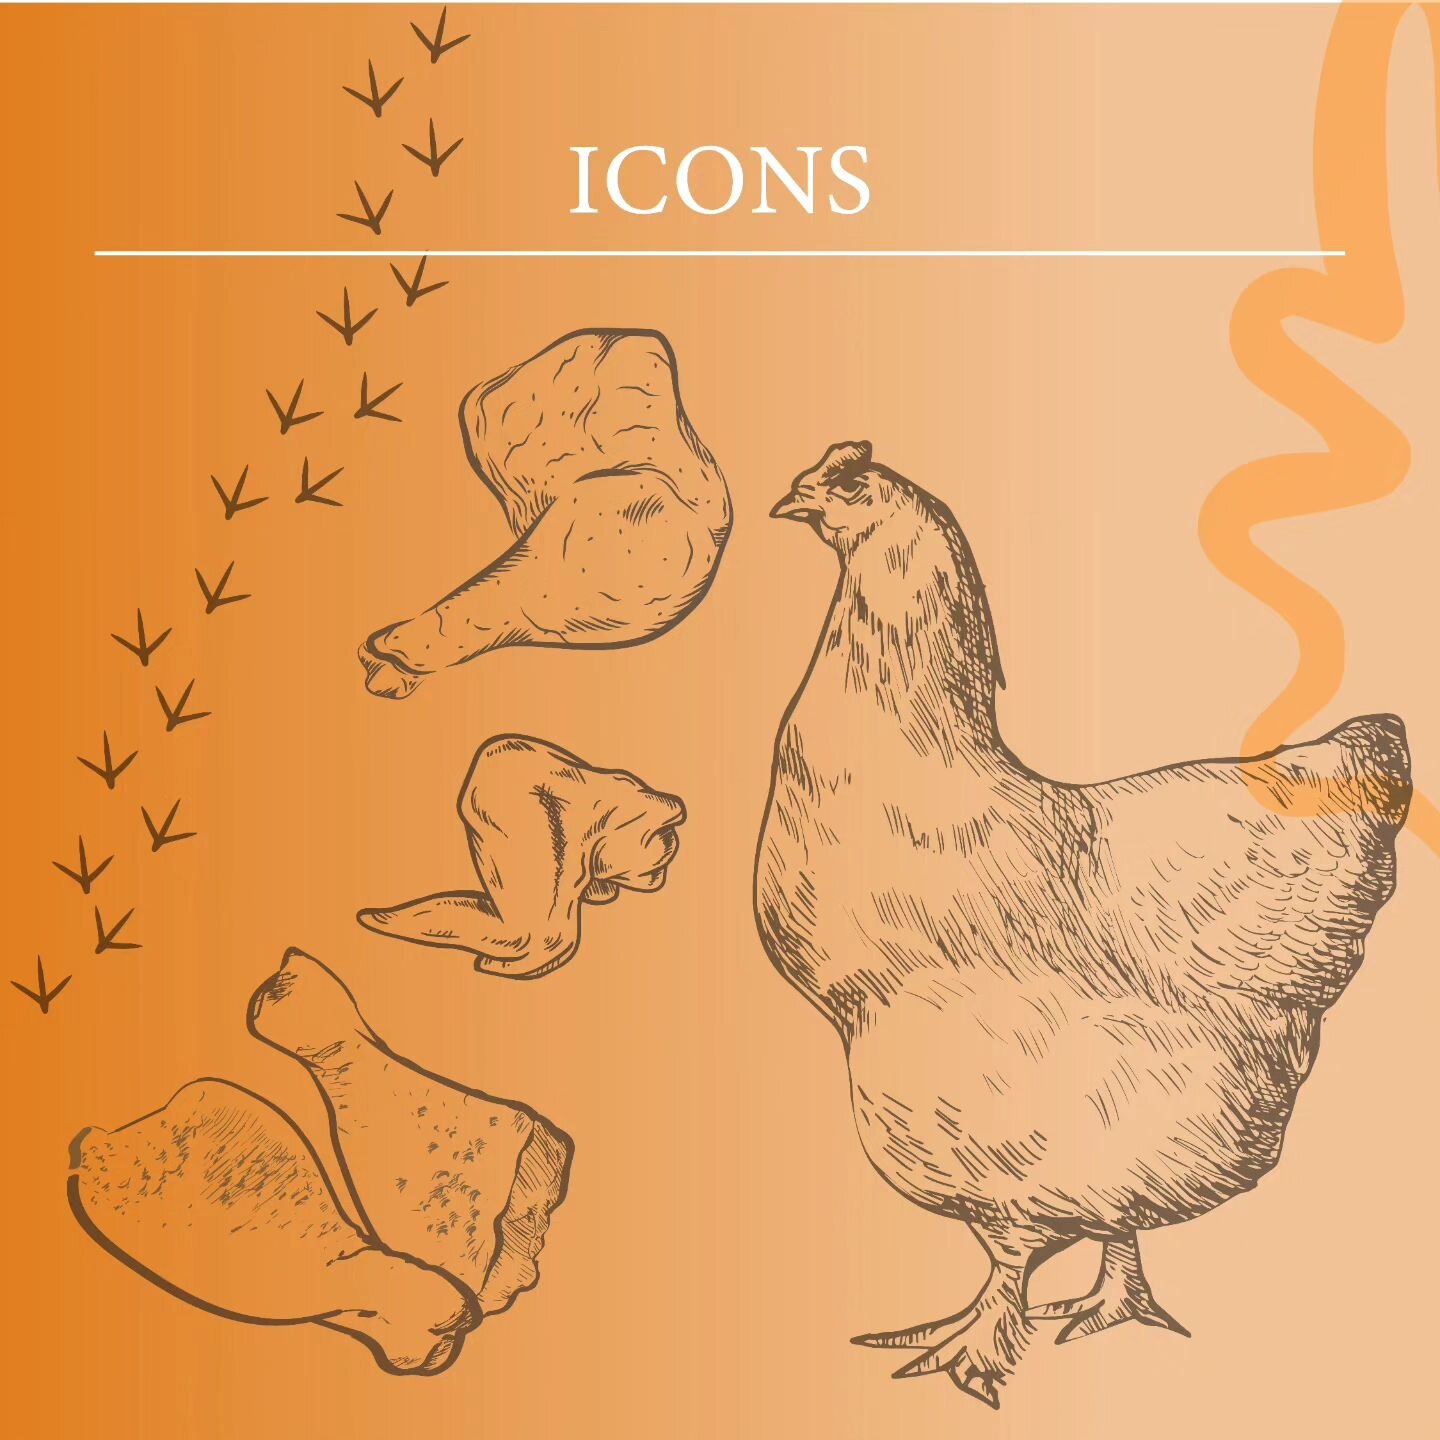 Icons speak louder than words! 🌟 We've gathered a suite of icons that are the visual shorthand of Poultry Specialties' brand identity. Seamlessly integrated across all platforms, they enhance brand recognition of @poultry_specialties and cohesivenes